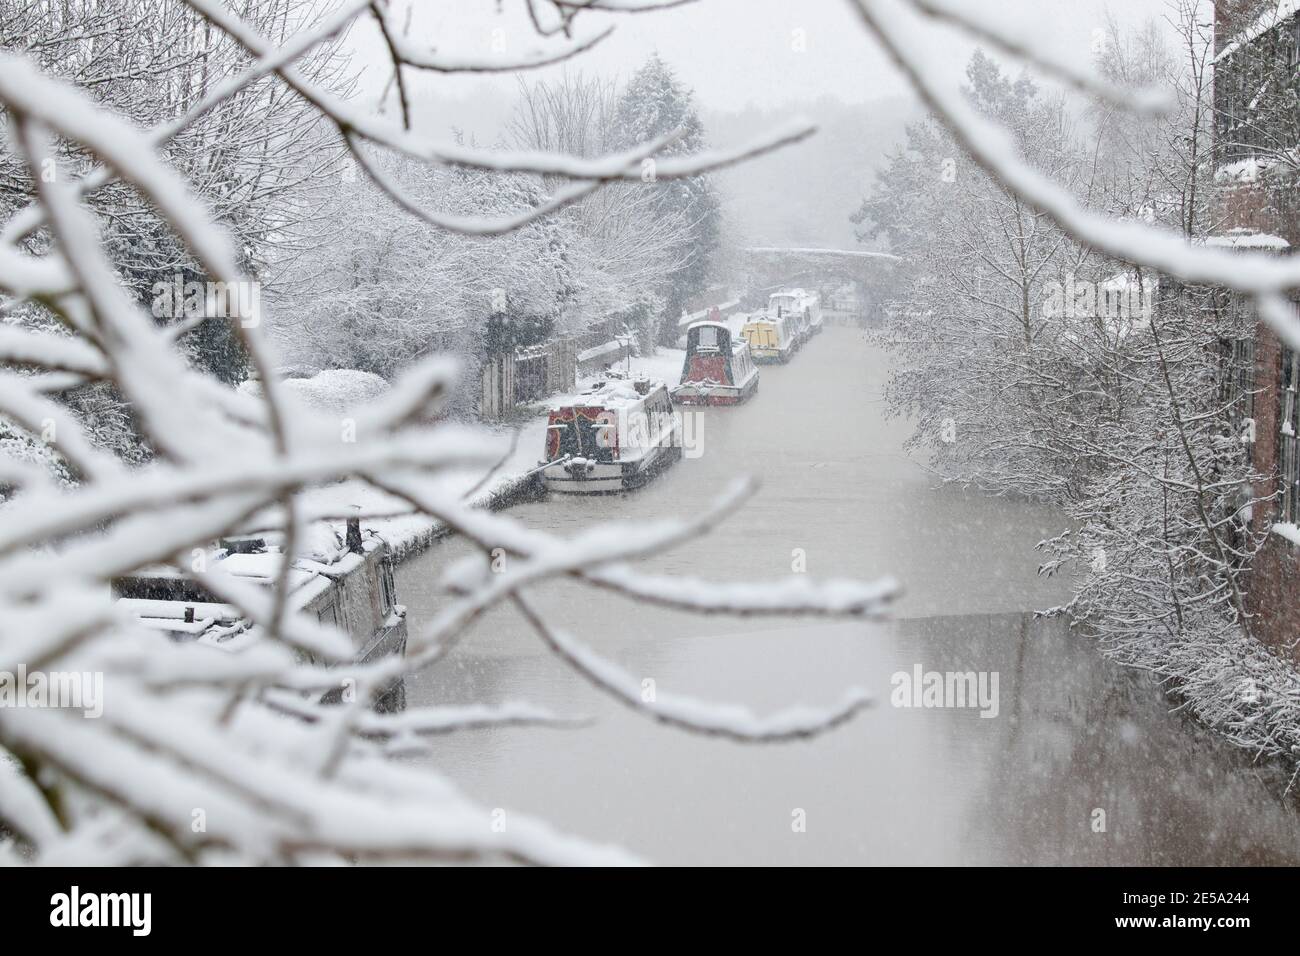 The snow covered scene along the Coventry canal near Atherstone, North Warwickshire. Stock Photo